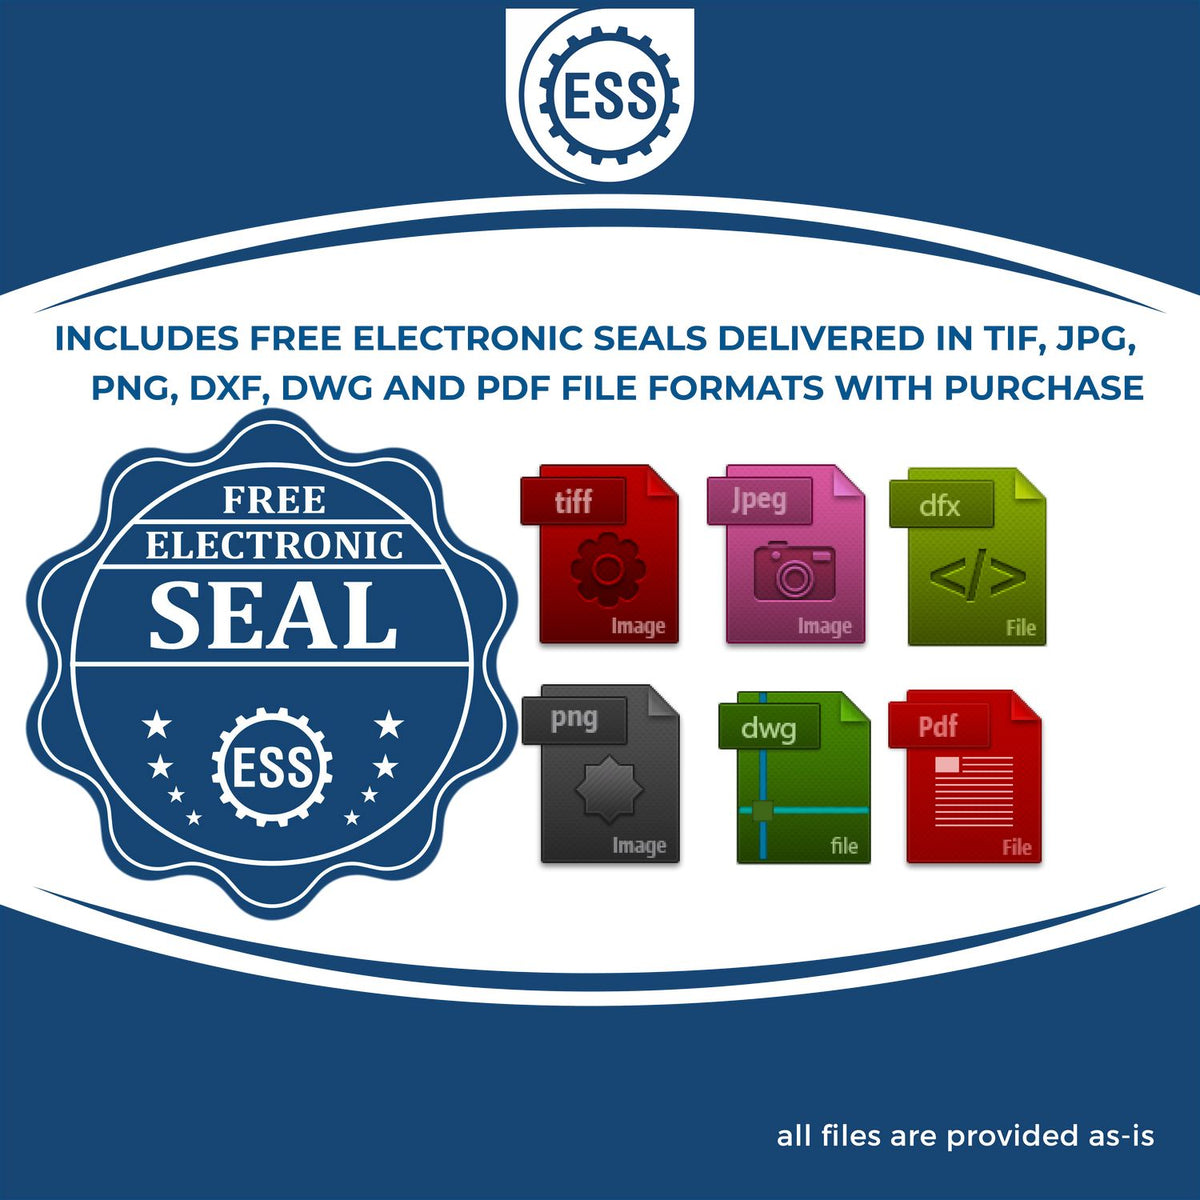 An infographic for the free electronic seal for the Slim Pre-Inked Florida Professional Geologist Seal Stamp illustrating the different file type icons such as DXF, DWG, TIF, JPG and PNG.